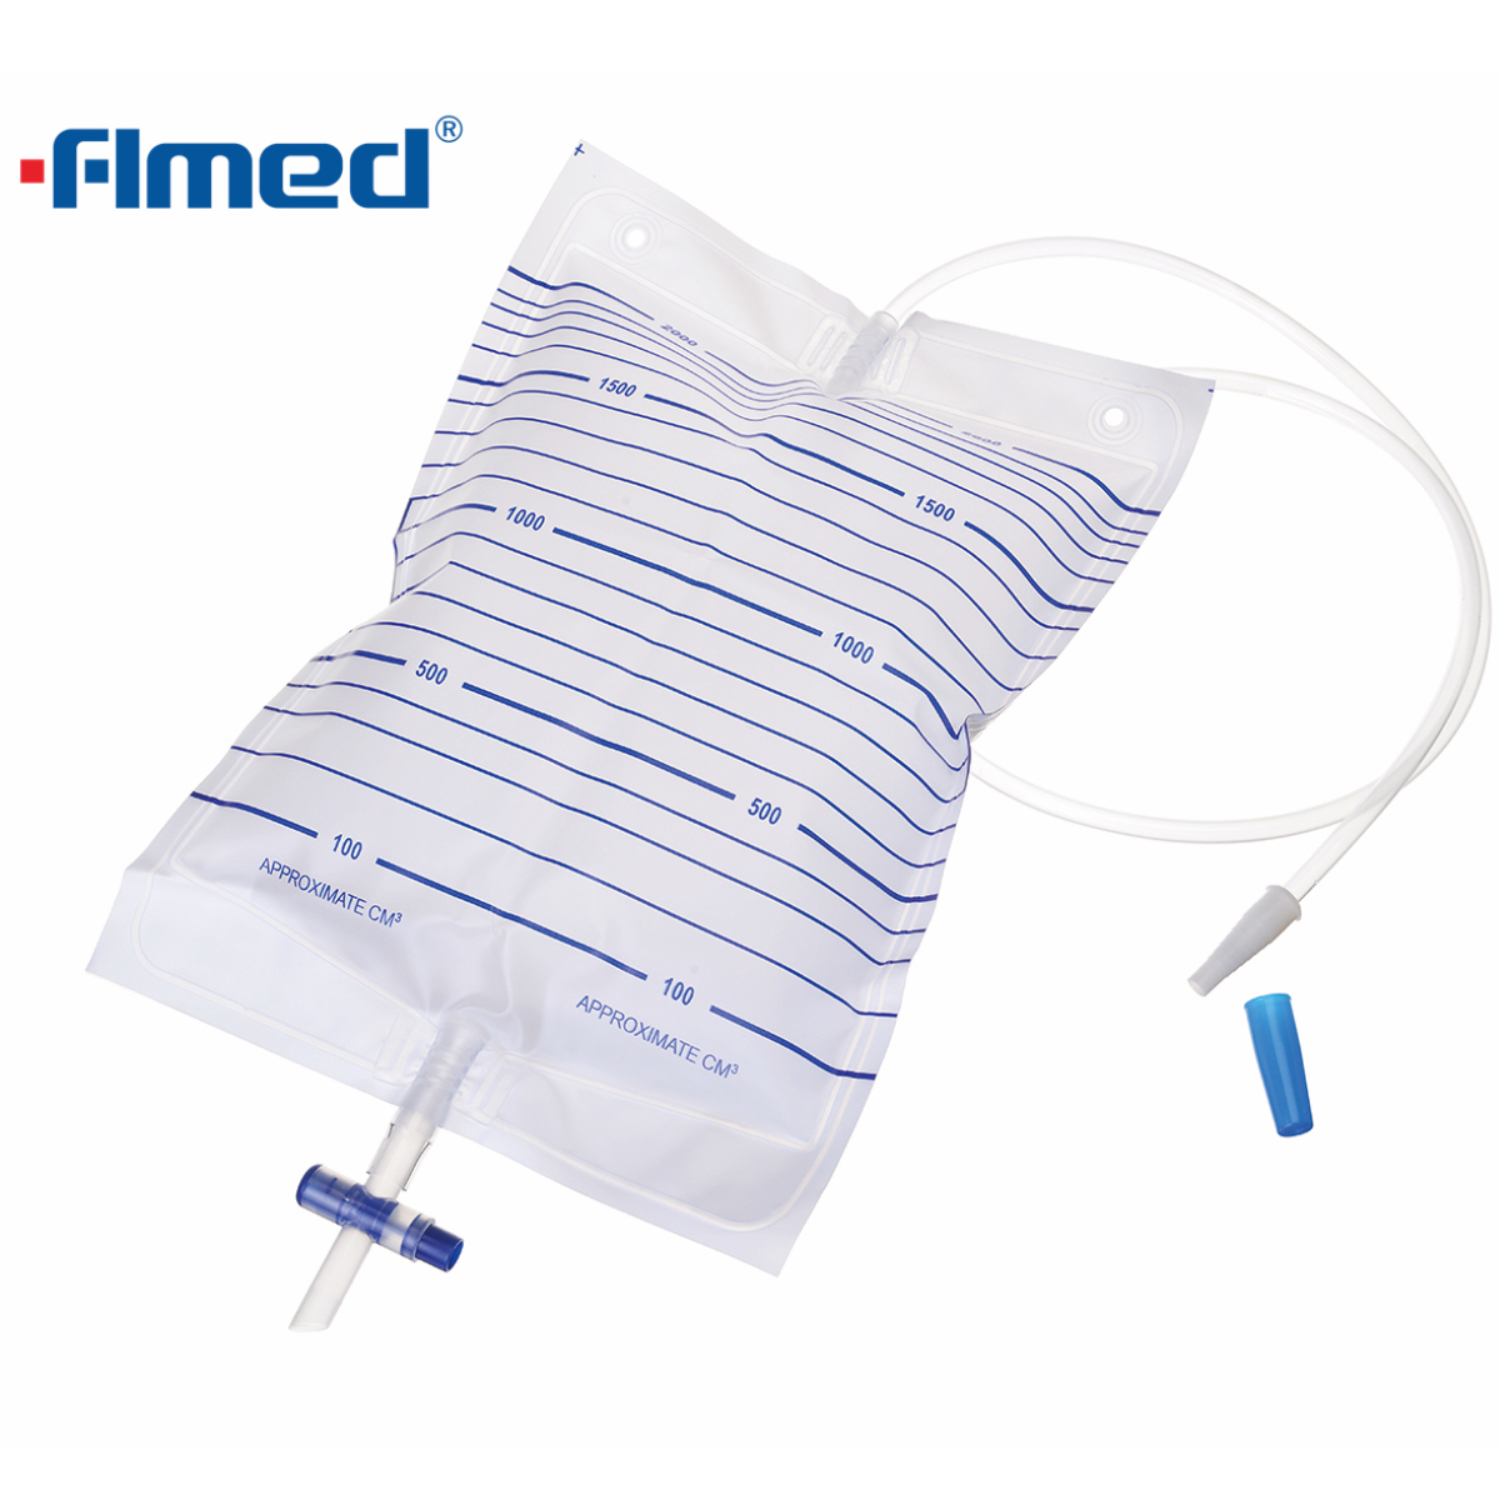 Economic Urine Bag 2000ml with Outlet Pull-push Valve